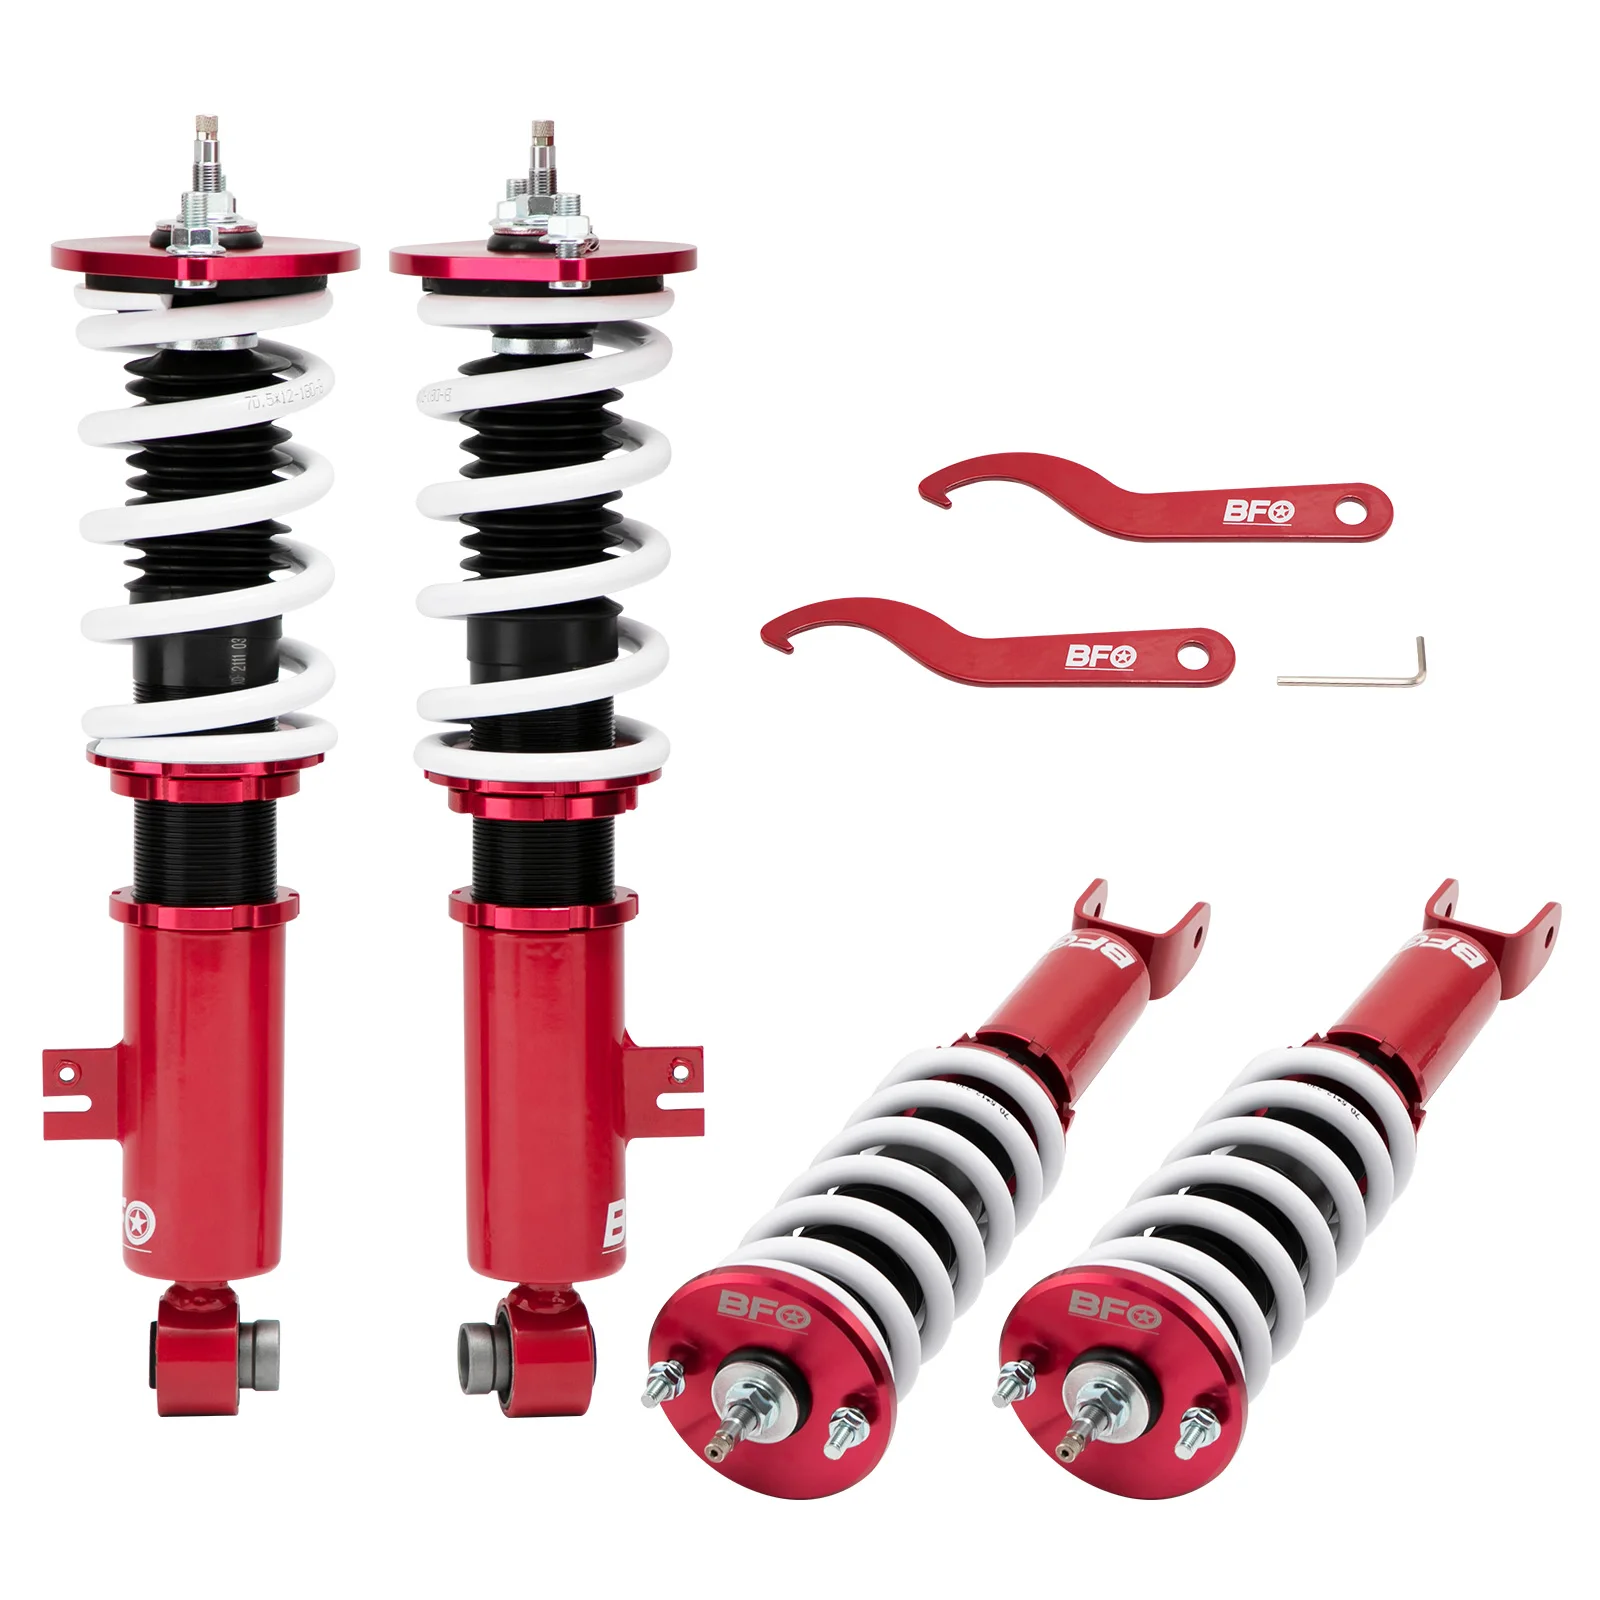 

BFO Coilovers Adj. Damper Suspension Kit For Nissan 300ZX 1990-1996 Z32 Coilovers Lowering Coil Shock Absorbers Struts